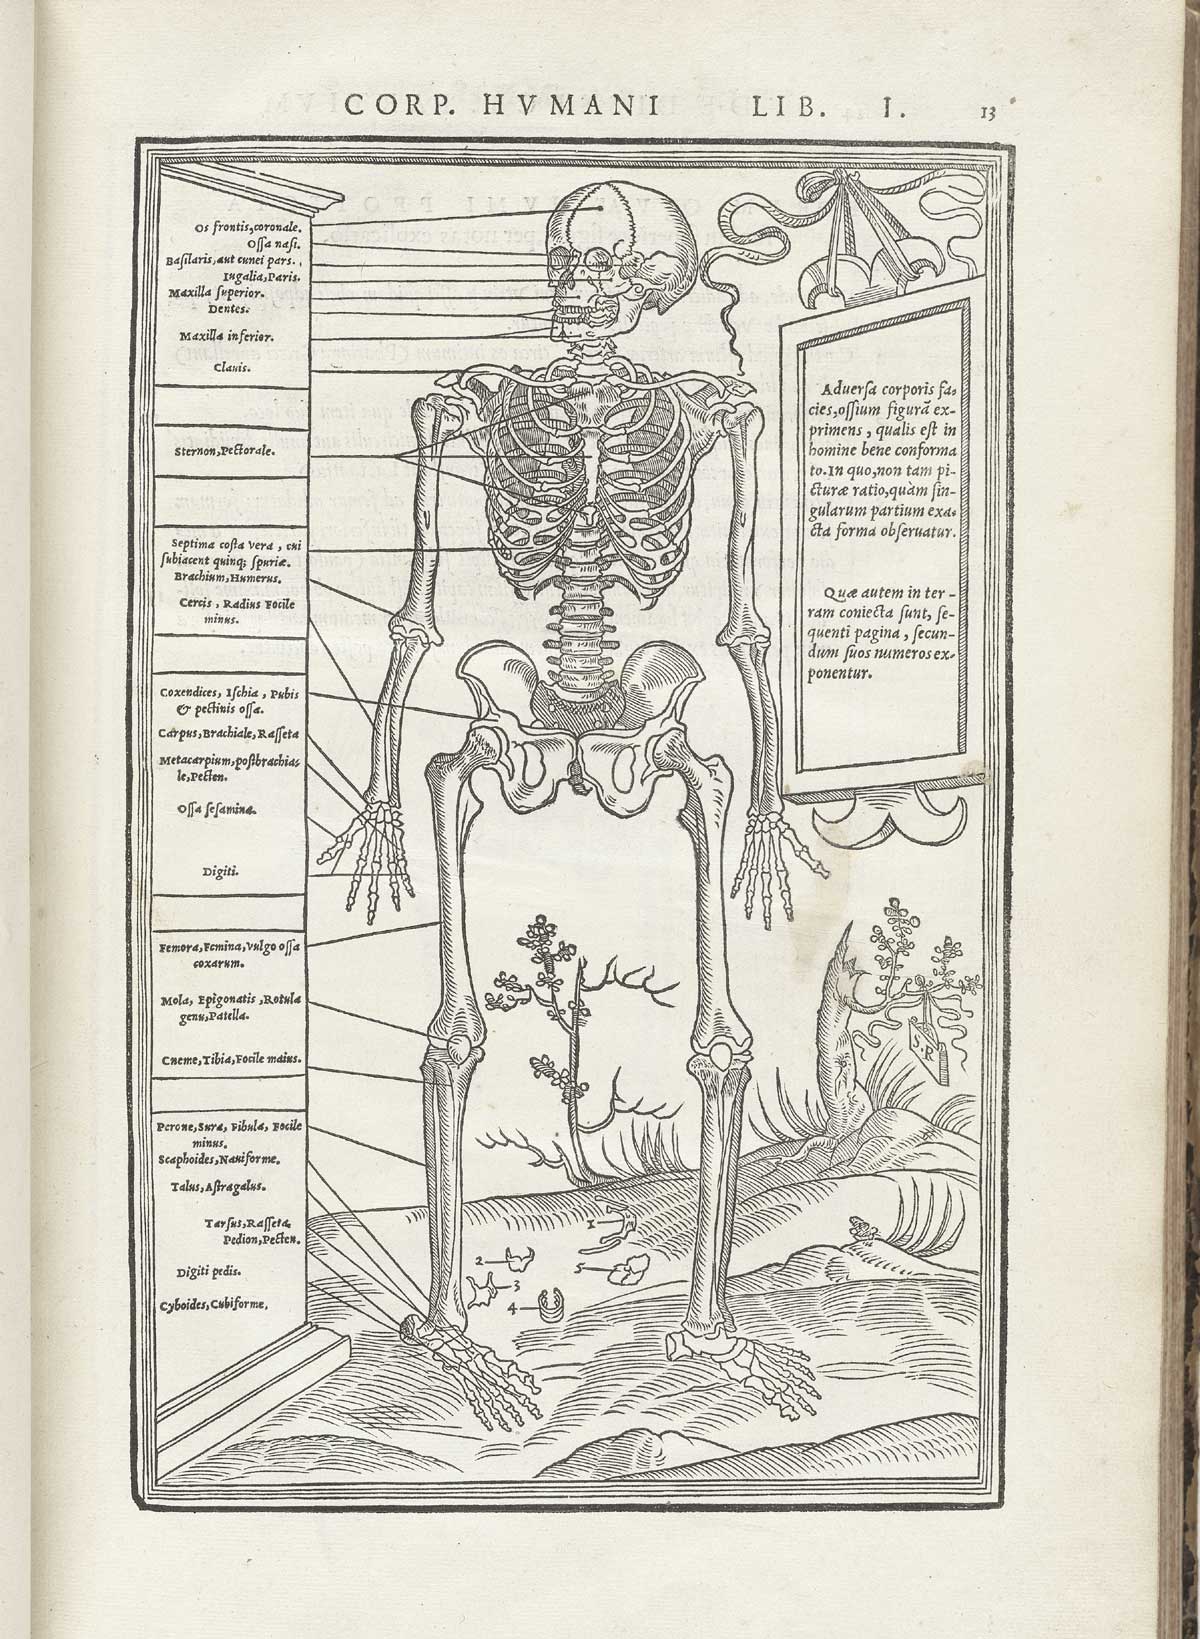 Woodcut skeleton figure standing in a pastoral setting, facing forward, with boxes of Latin text surrounding him pointing to and naming numerous bone structures, from Charles Estienne’s De dissection partium corporis humani libri tres, NLM Call no.: WZ 240 E81dd 1545.